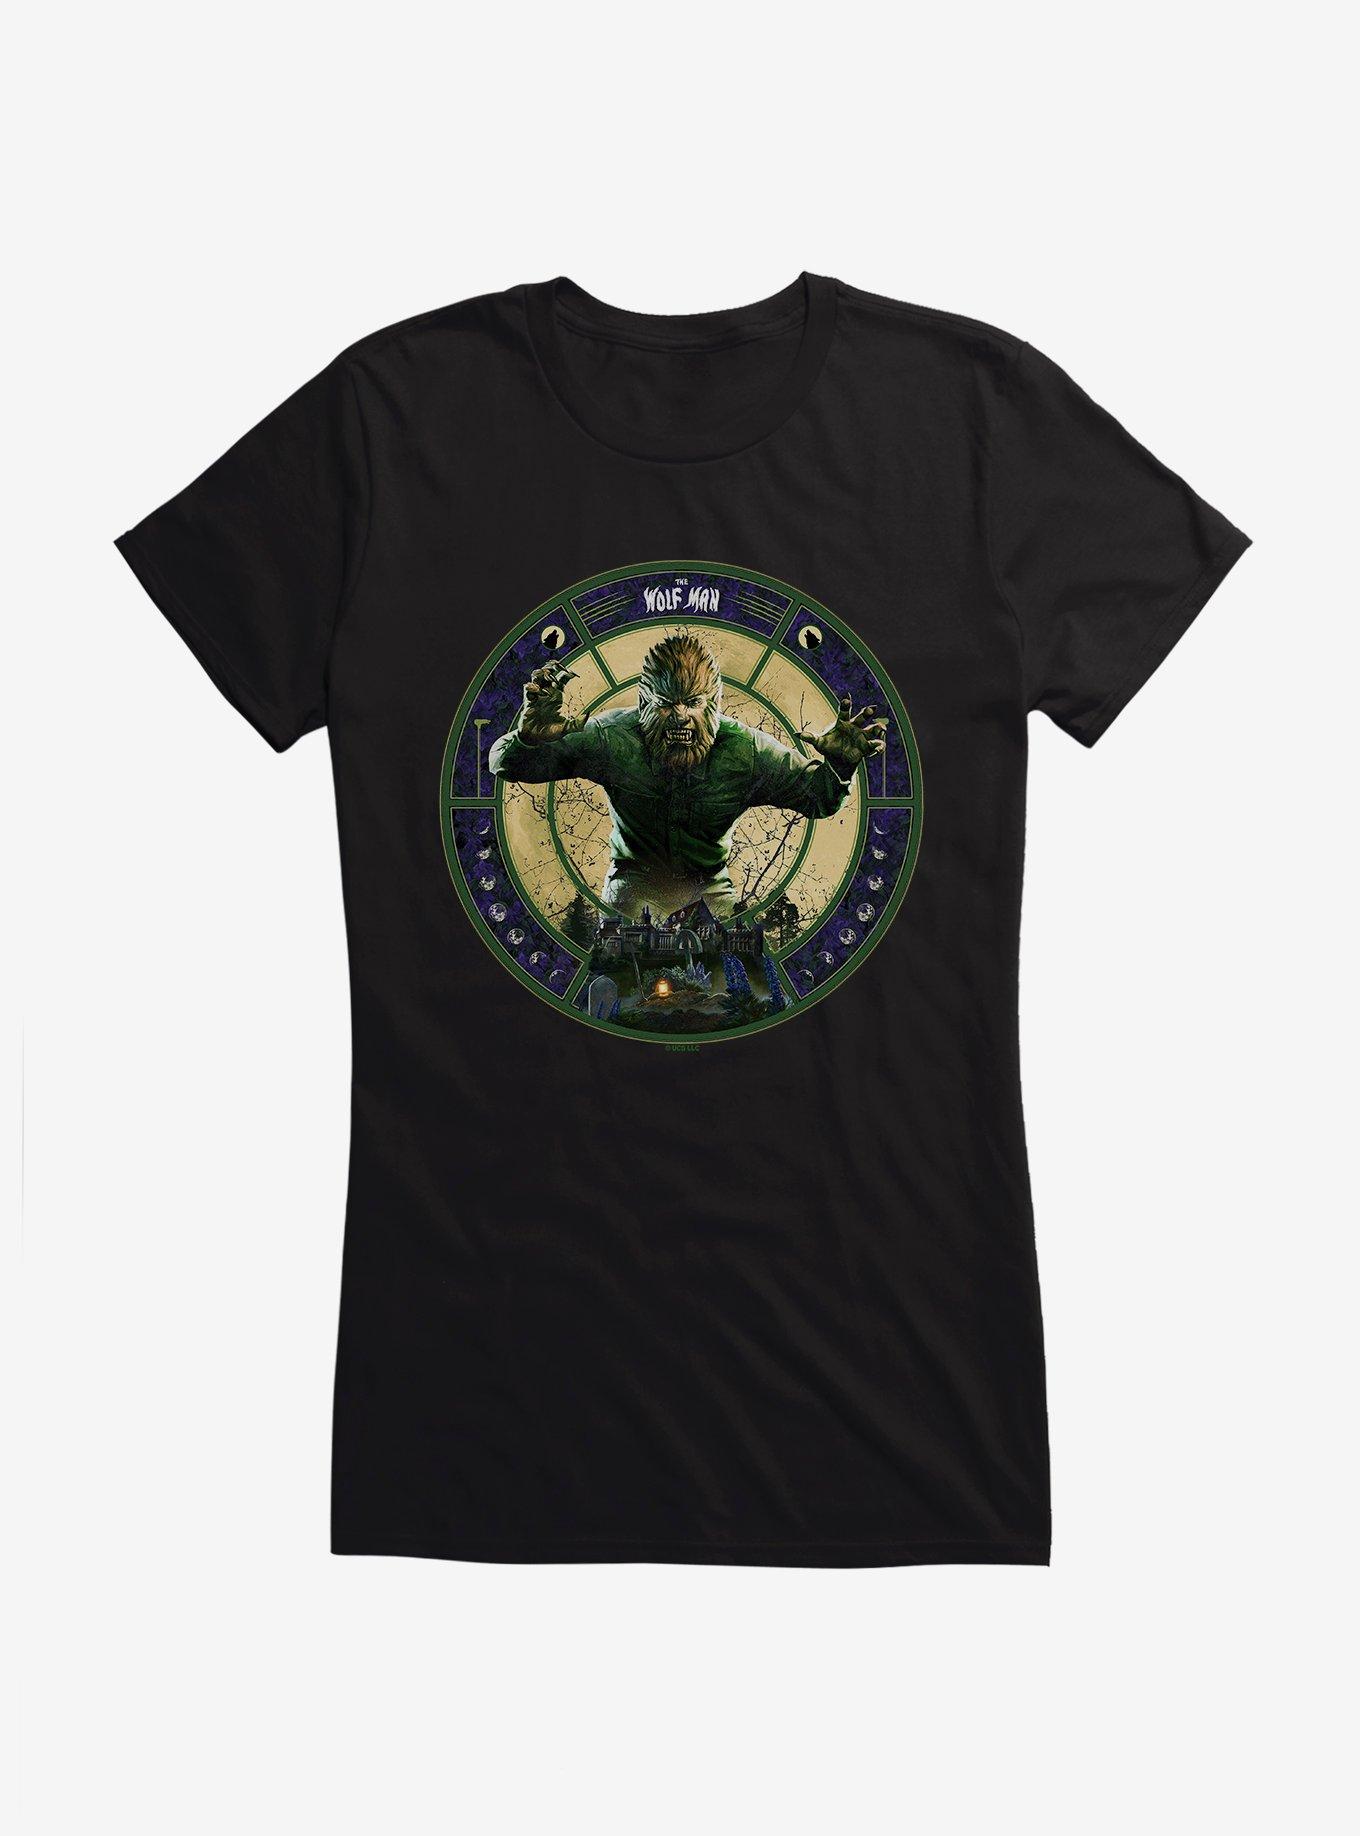 The Wolf Man Moon Phases Girls T-Shirt, BLACK, hi-res